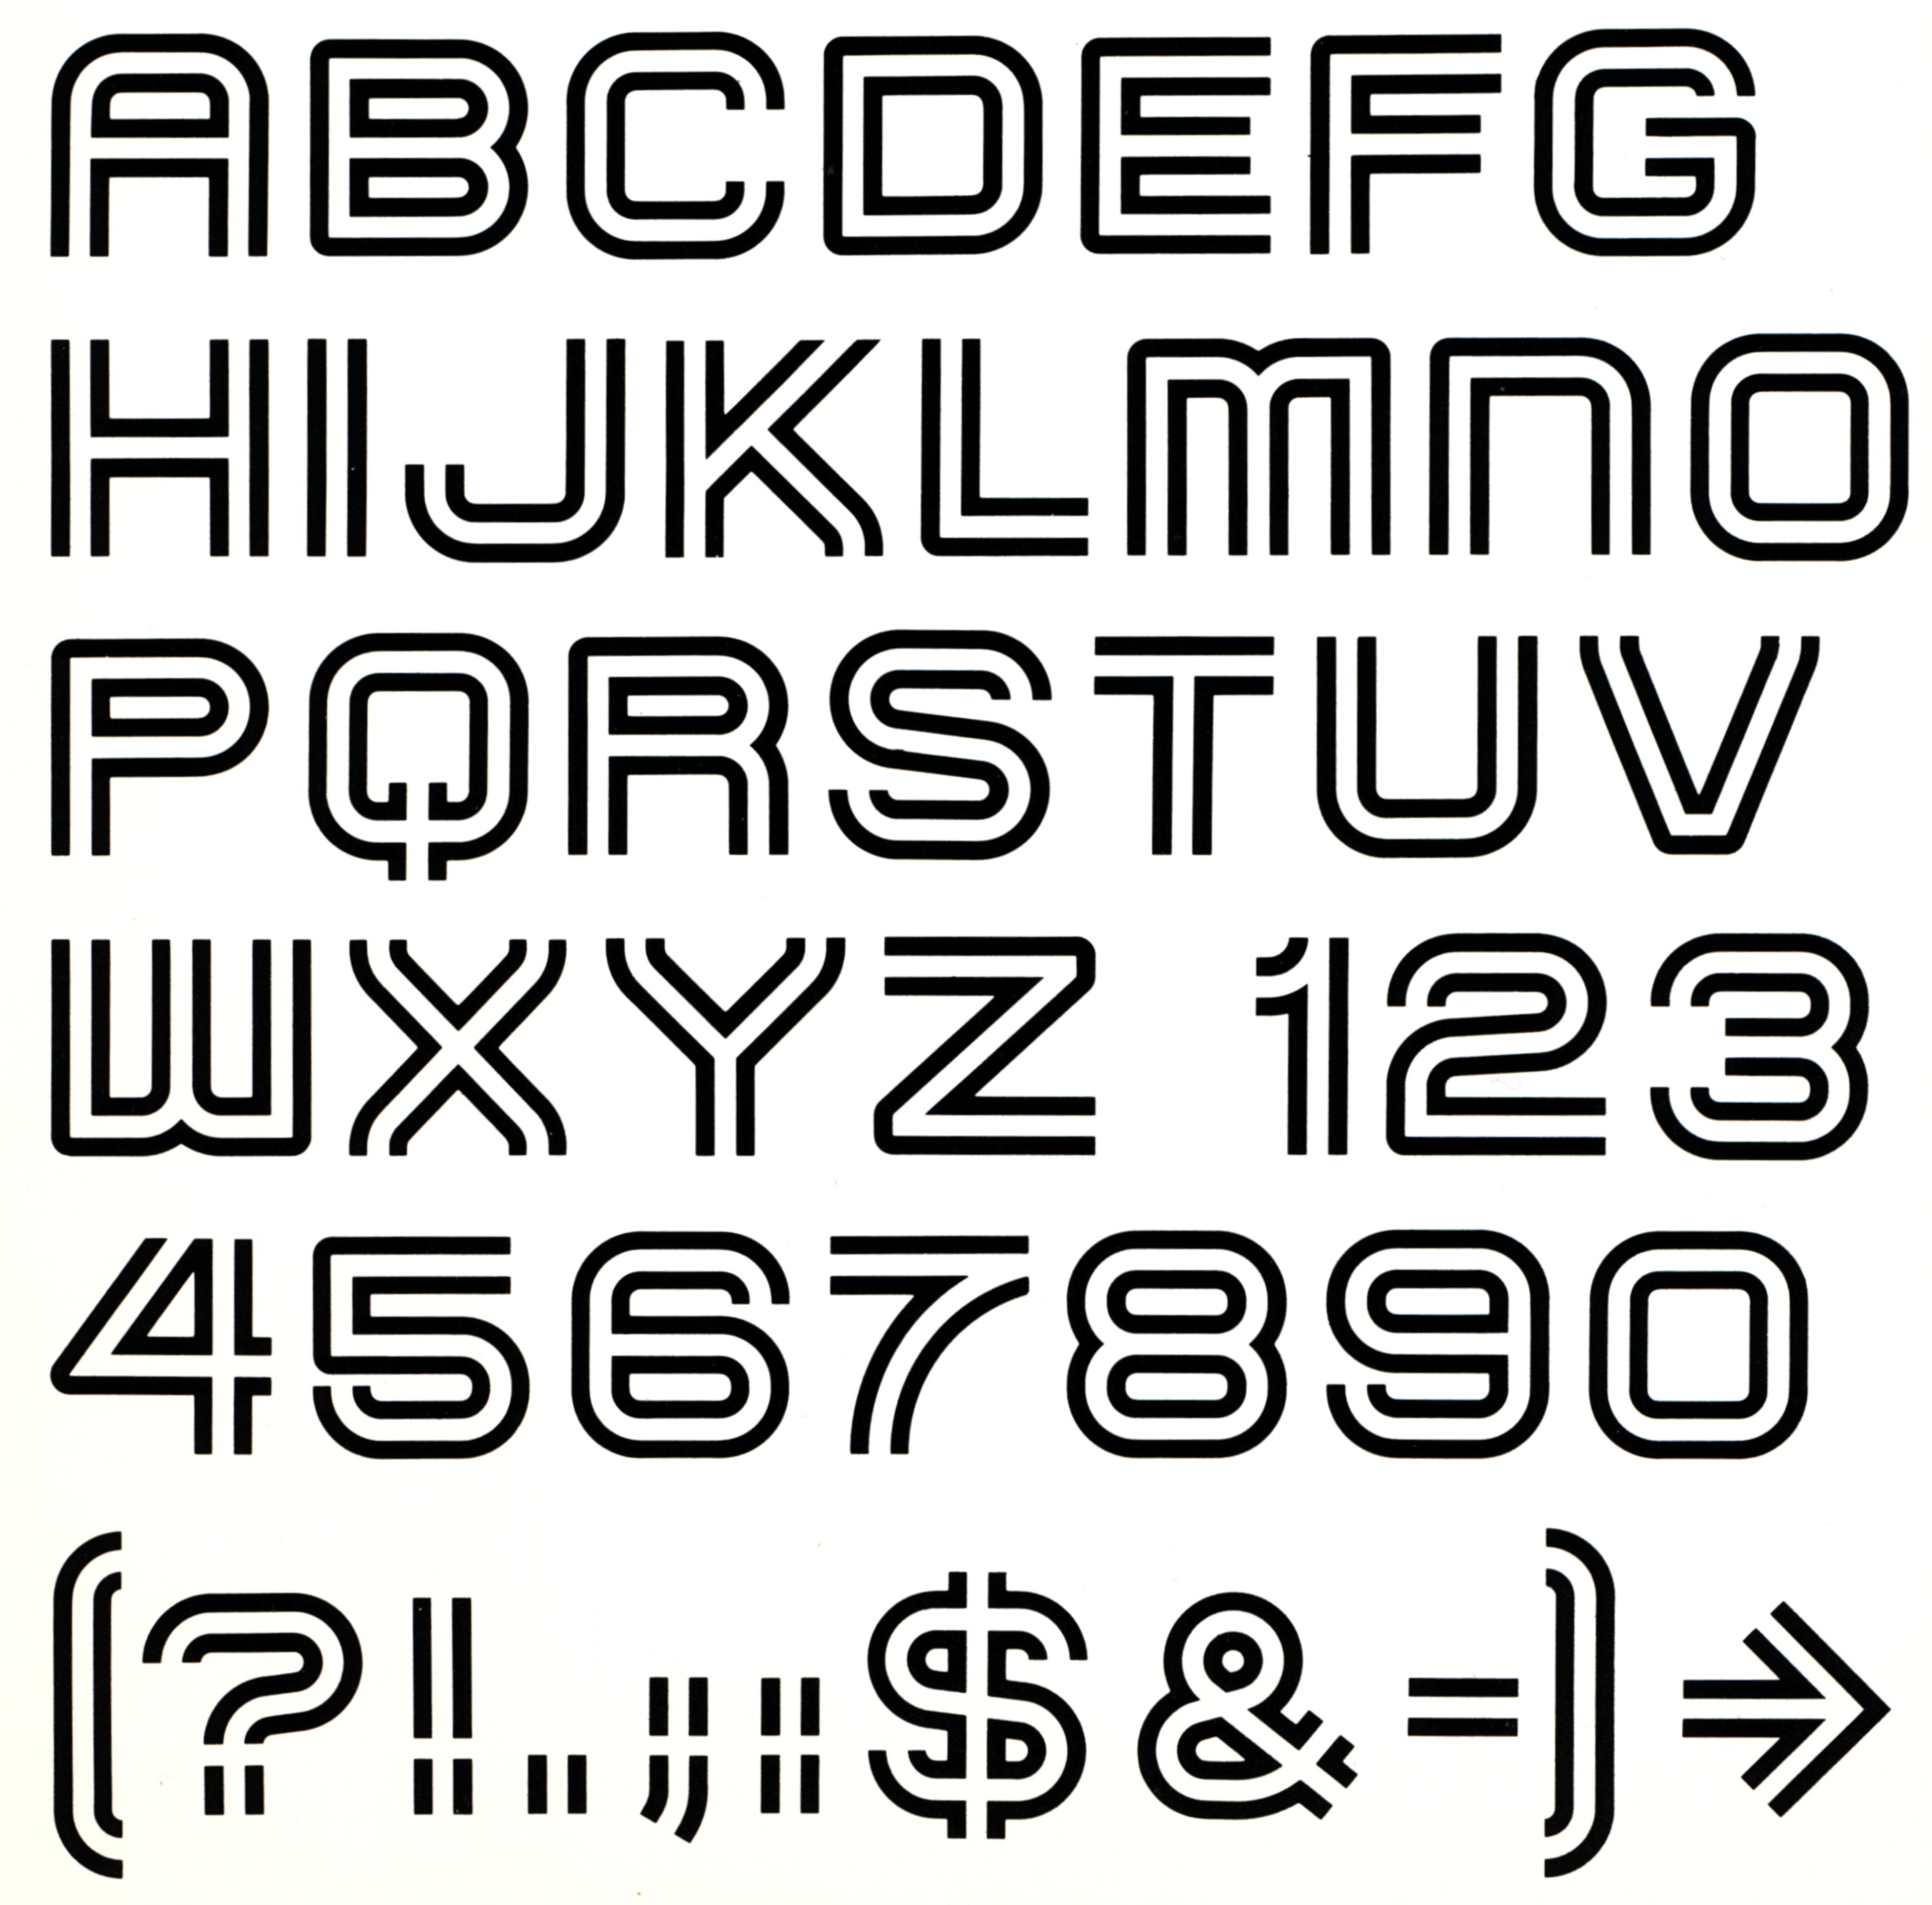 The Oxford typeface alphabet, numbers, and symbols featuring space within the stroke of the characters.